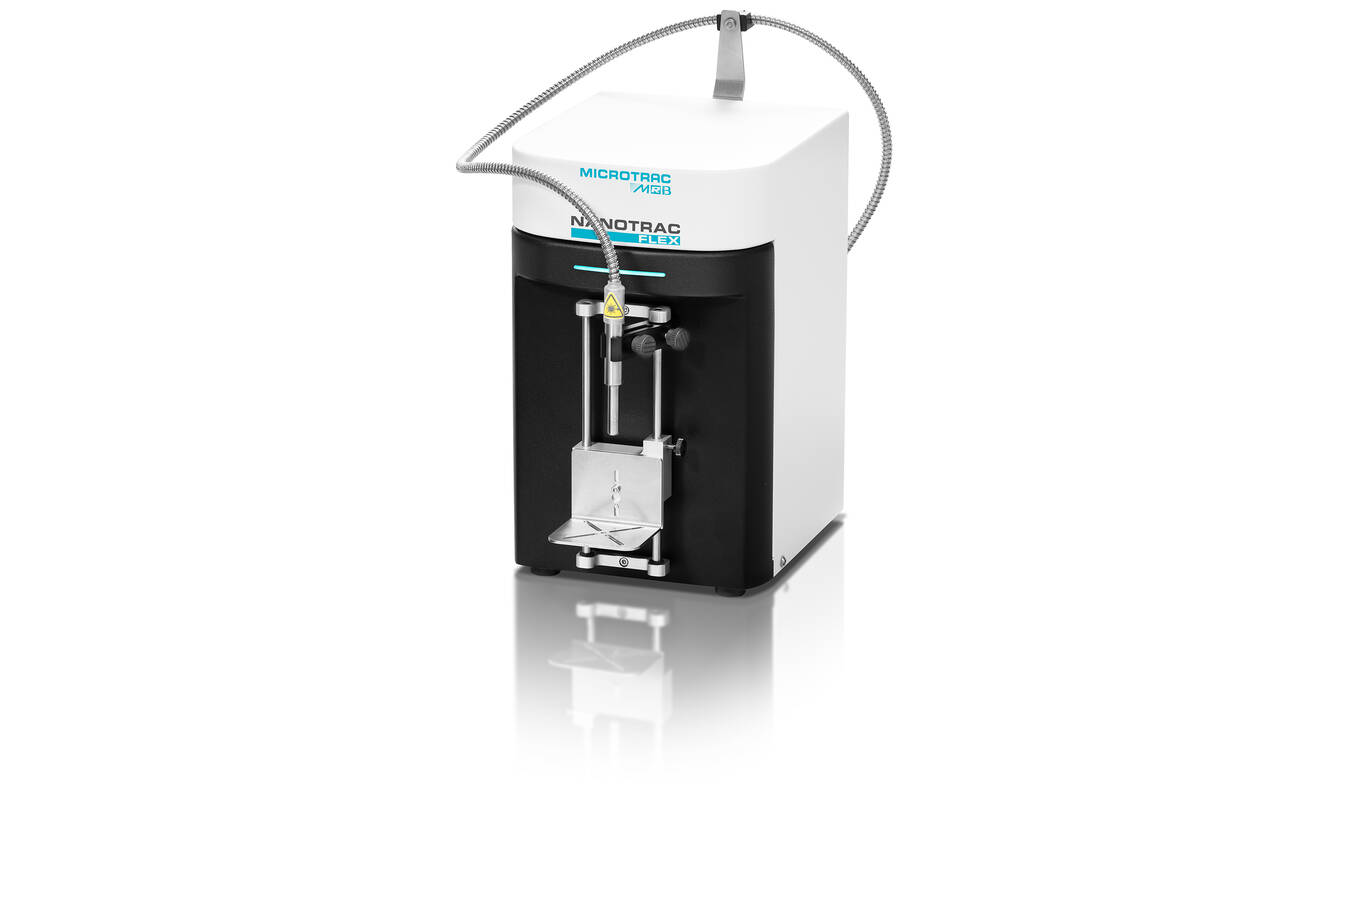 The Power of the Probe: Dynamic Light Scattering Made Easy Rapid, simple and reliable particle size measurements in suspensions and emulsions without using consumables - that is possible with the unique probe technology used in the analyzers of the Nanotrac series. 